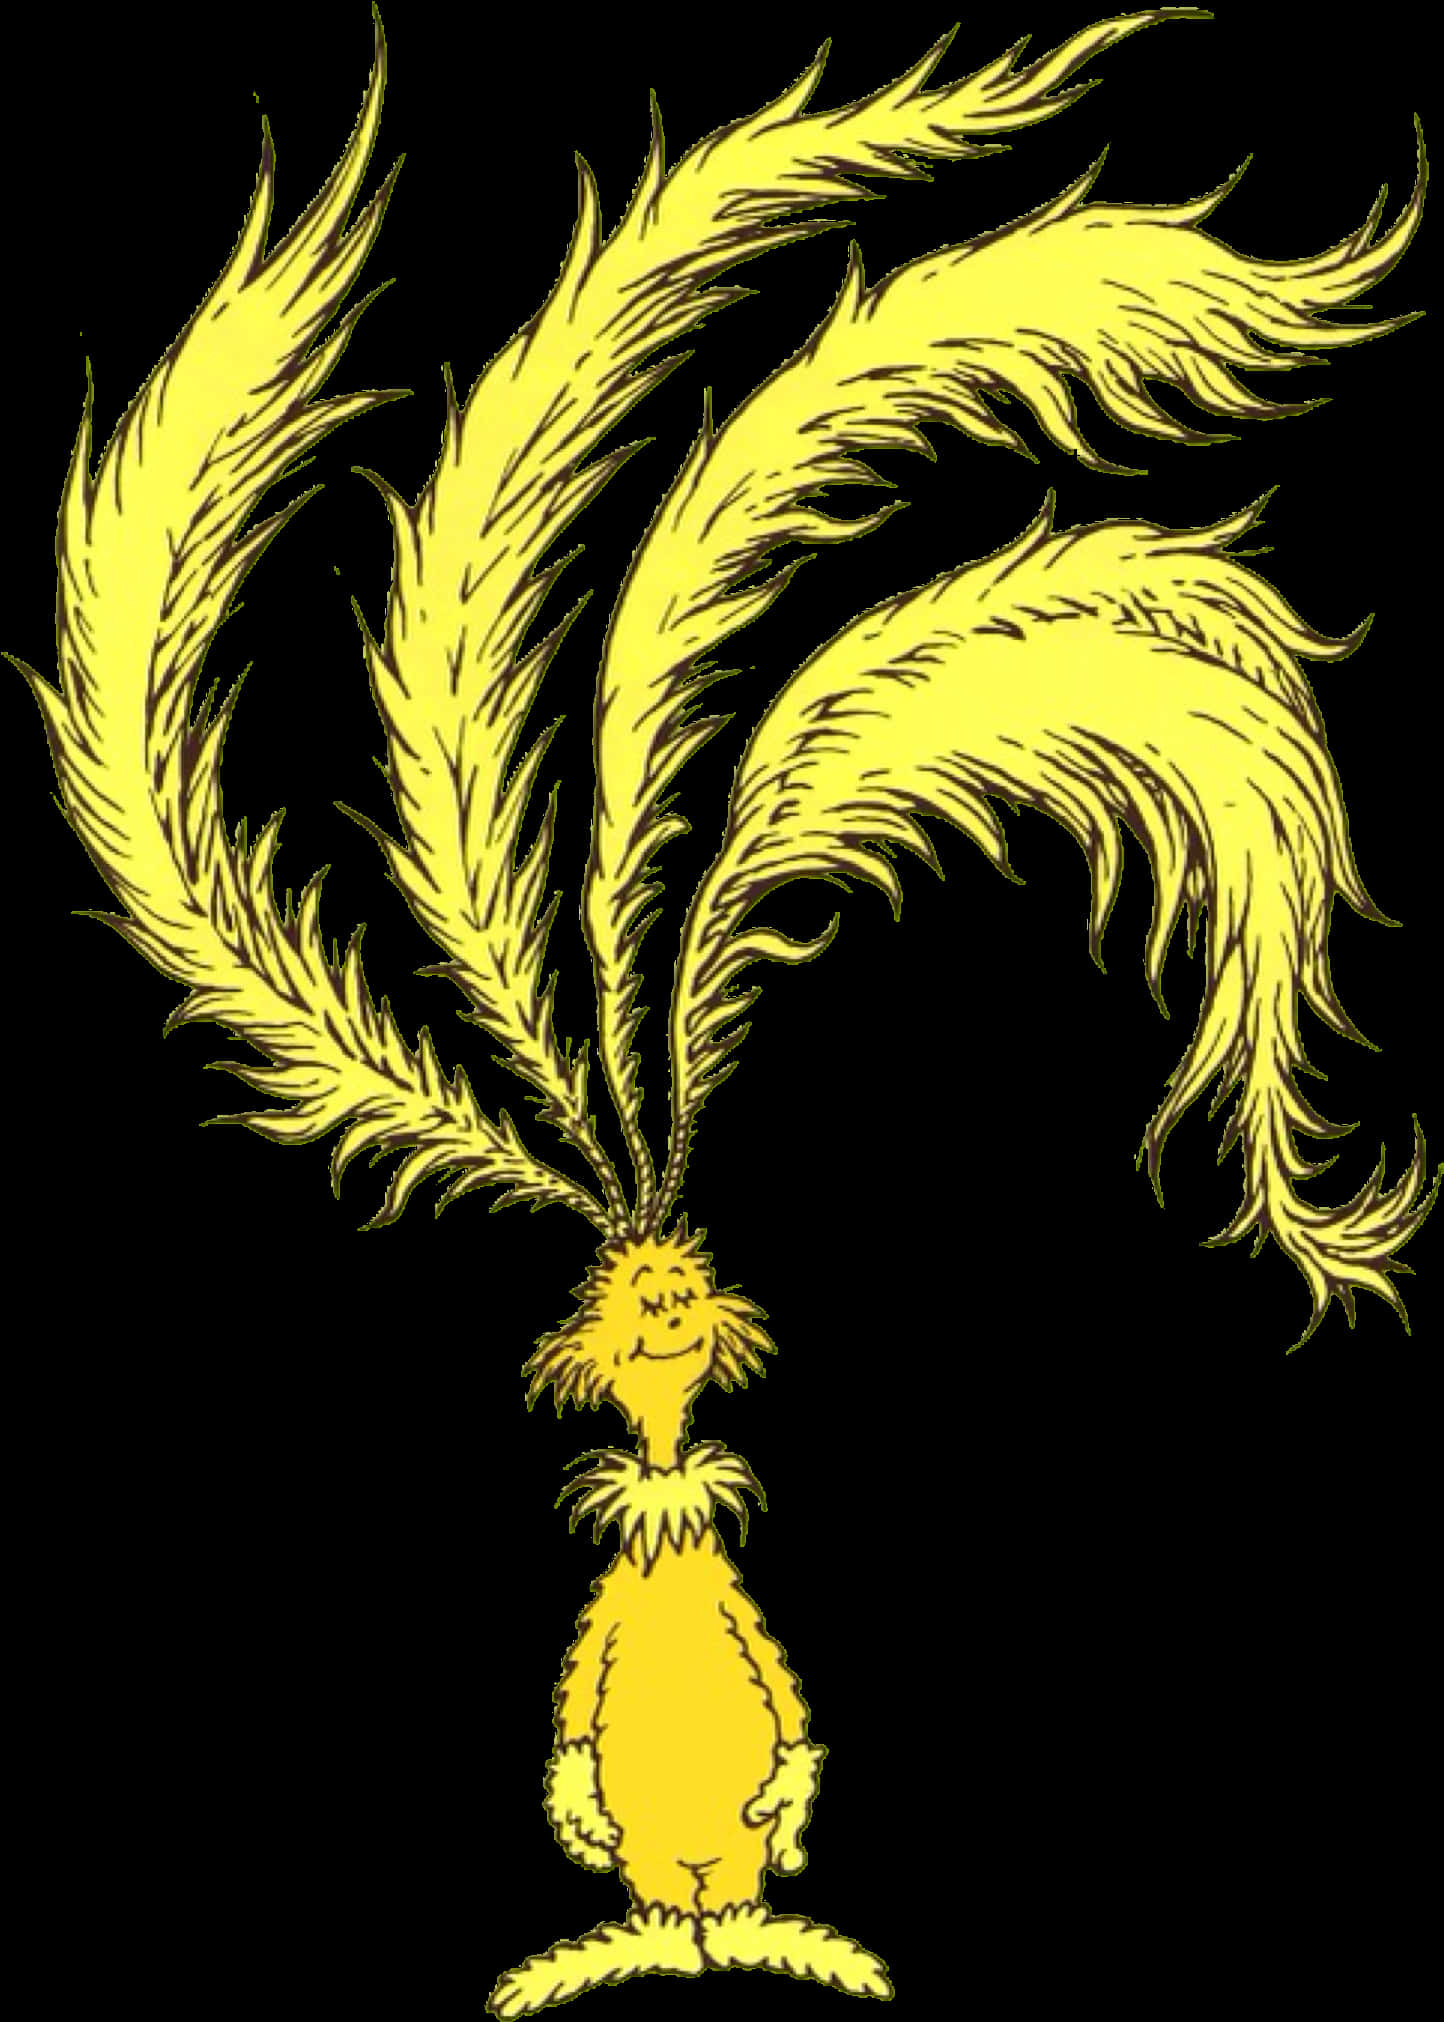 A Yellow Cartoon Character With Long Yellow Feathers